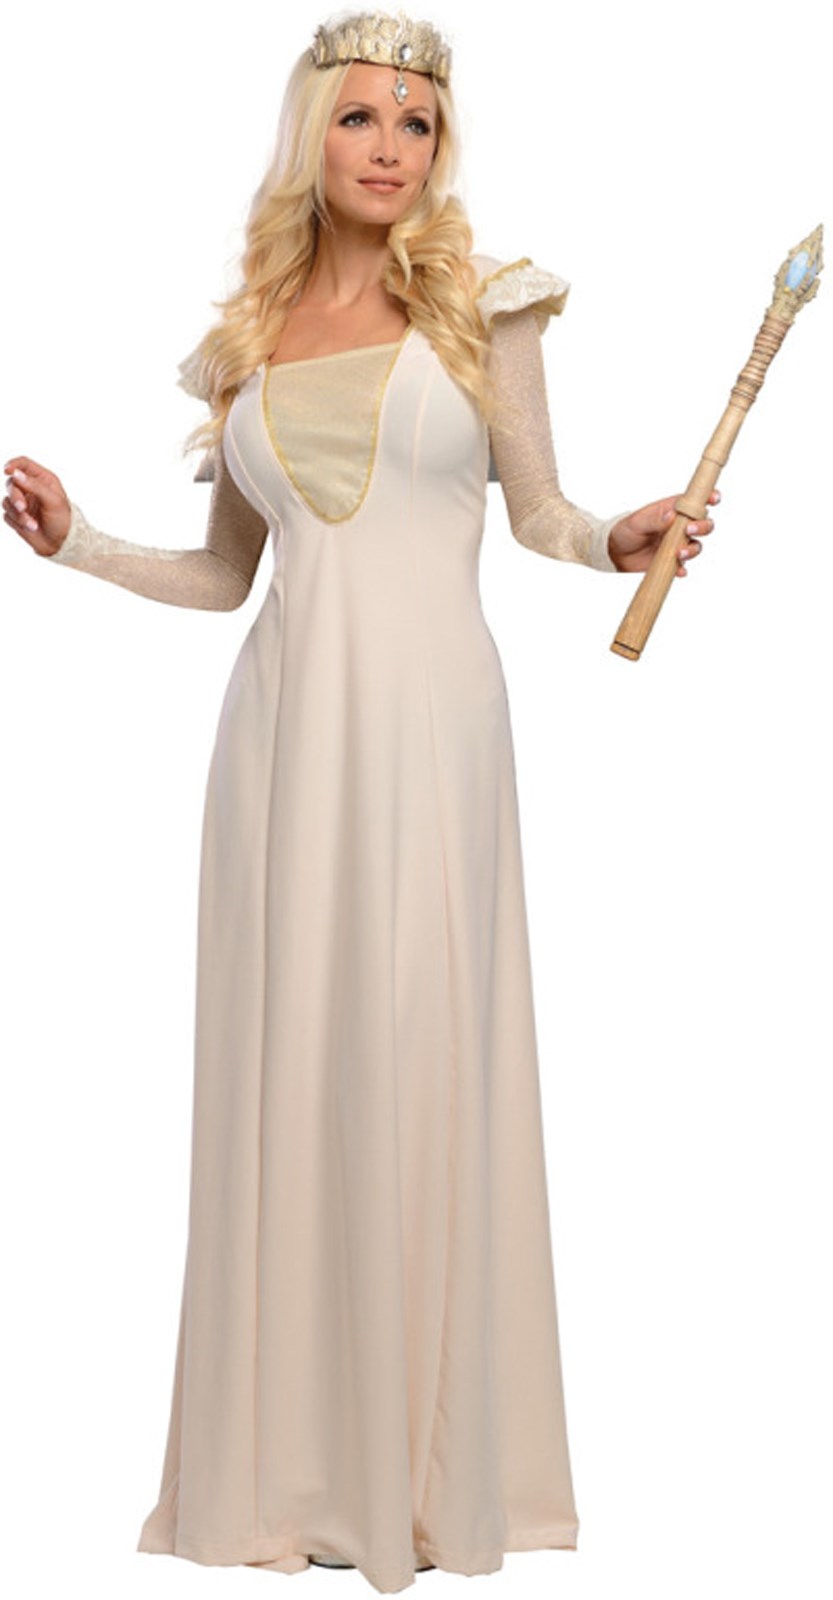 Oz The Great And Powerful Deluxe Glinda Adult Costume